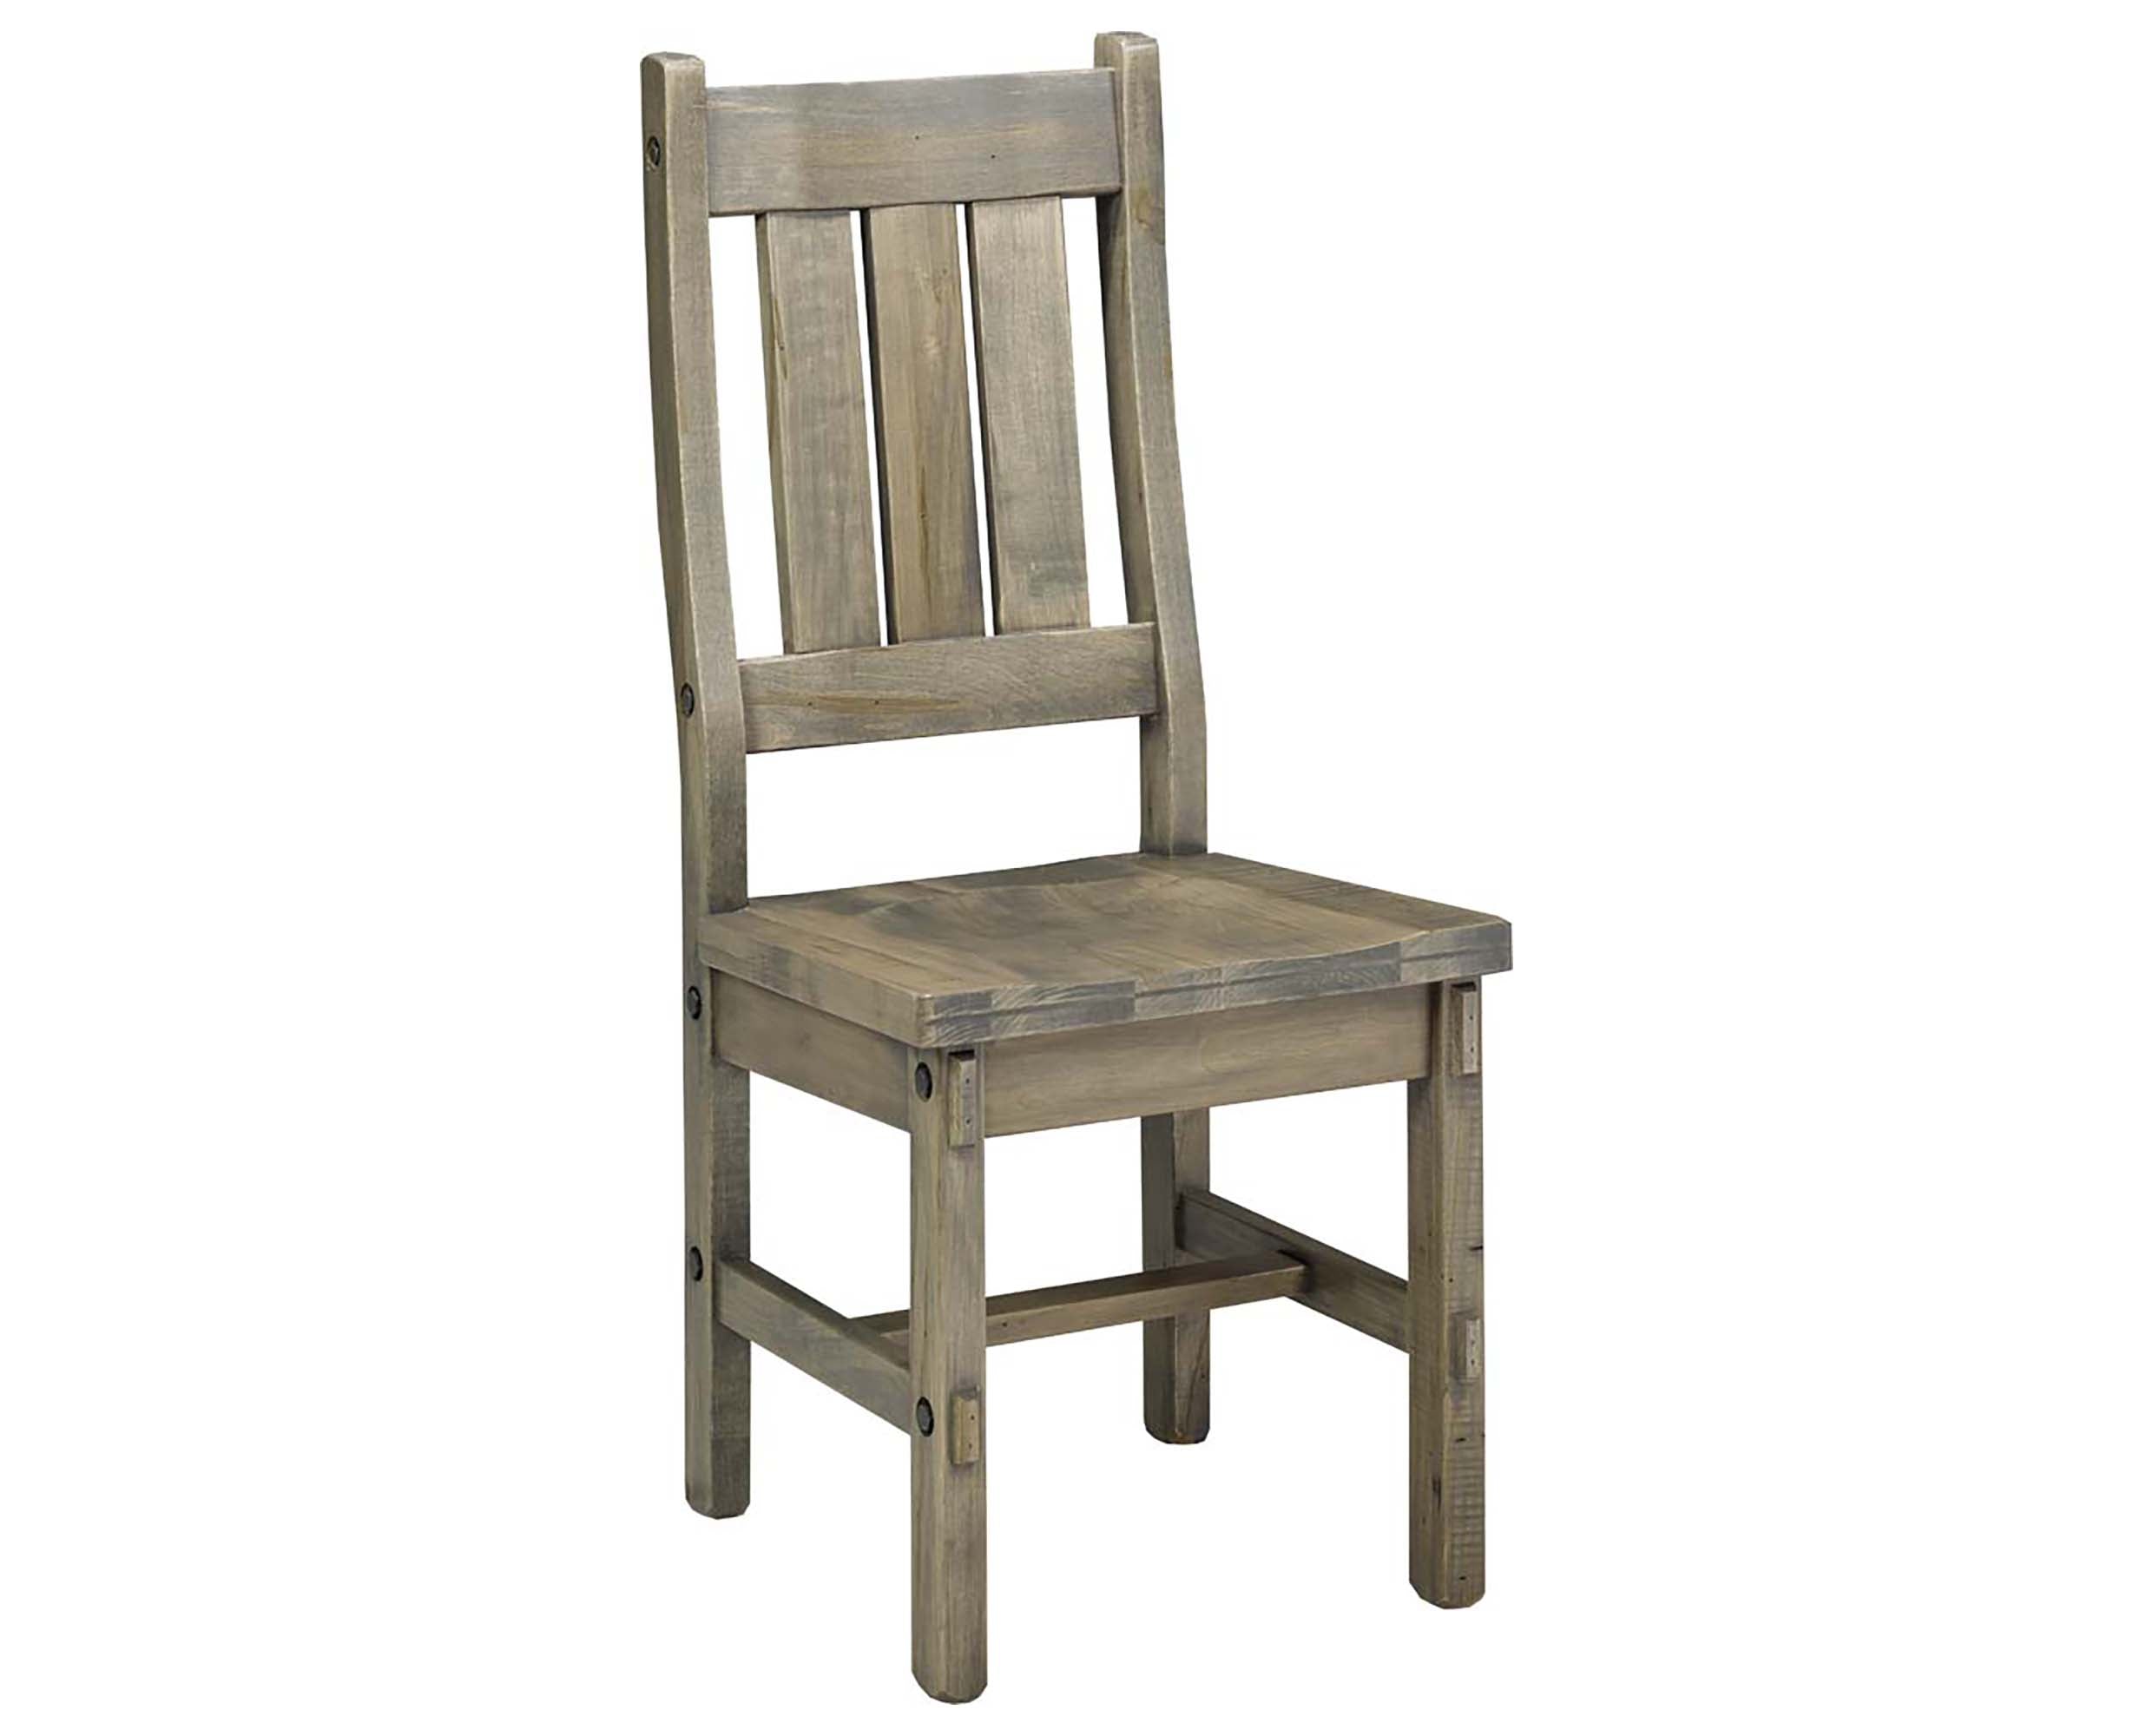 Chair as Shown | Cardinal Woodcraft Winchester (Rustic) Dining Chair | Valley Ridge Furniture